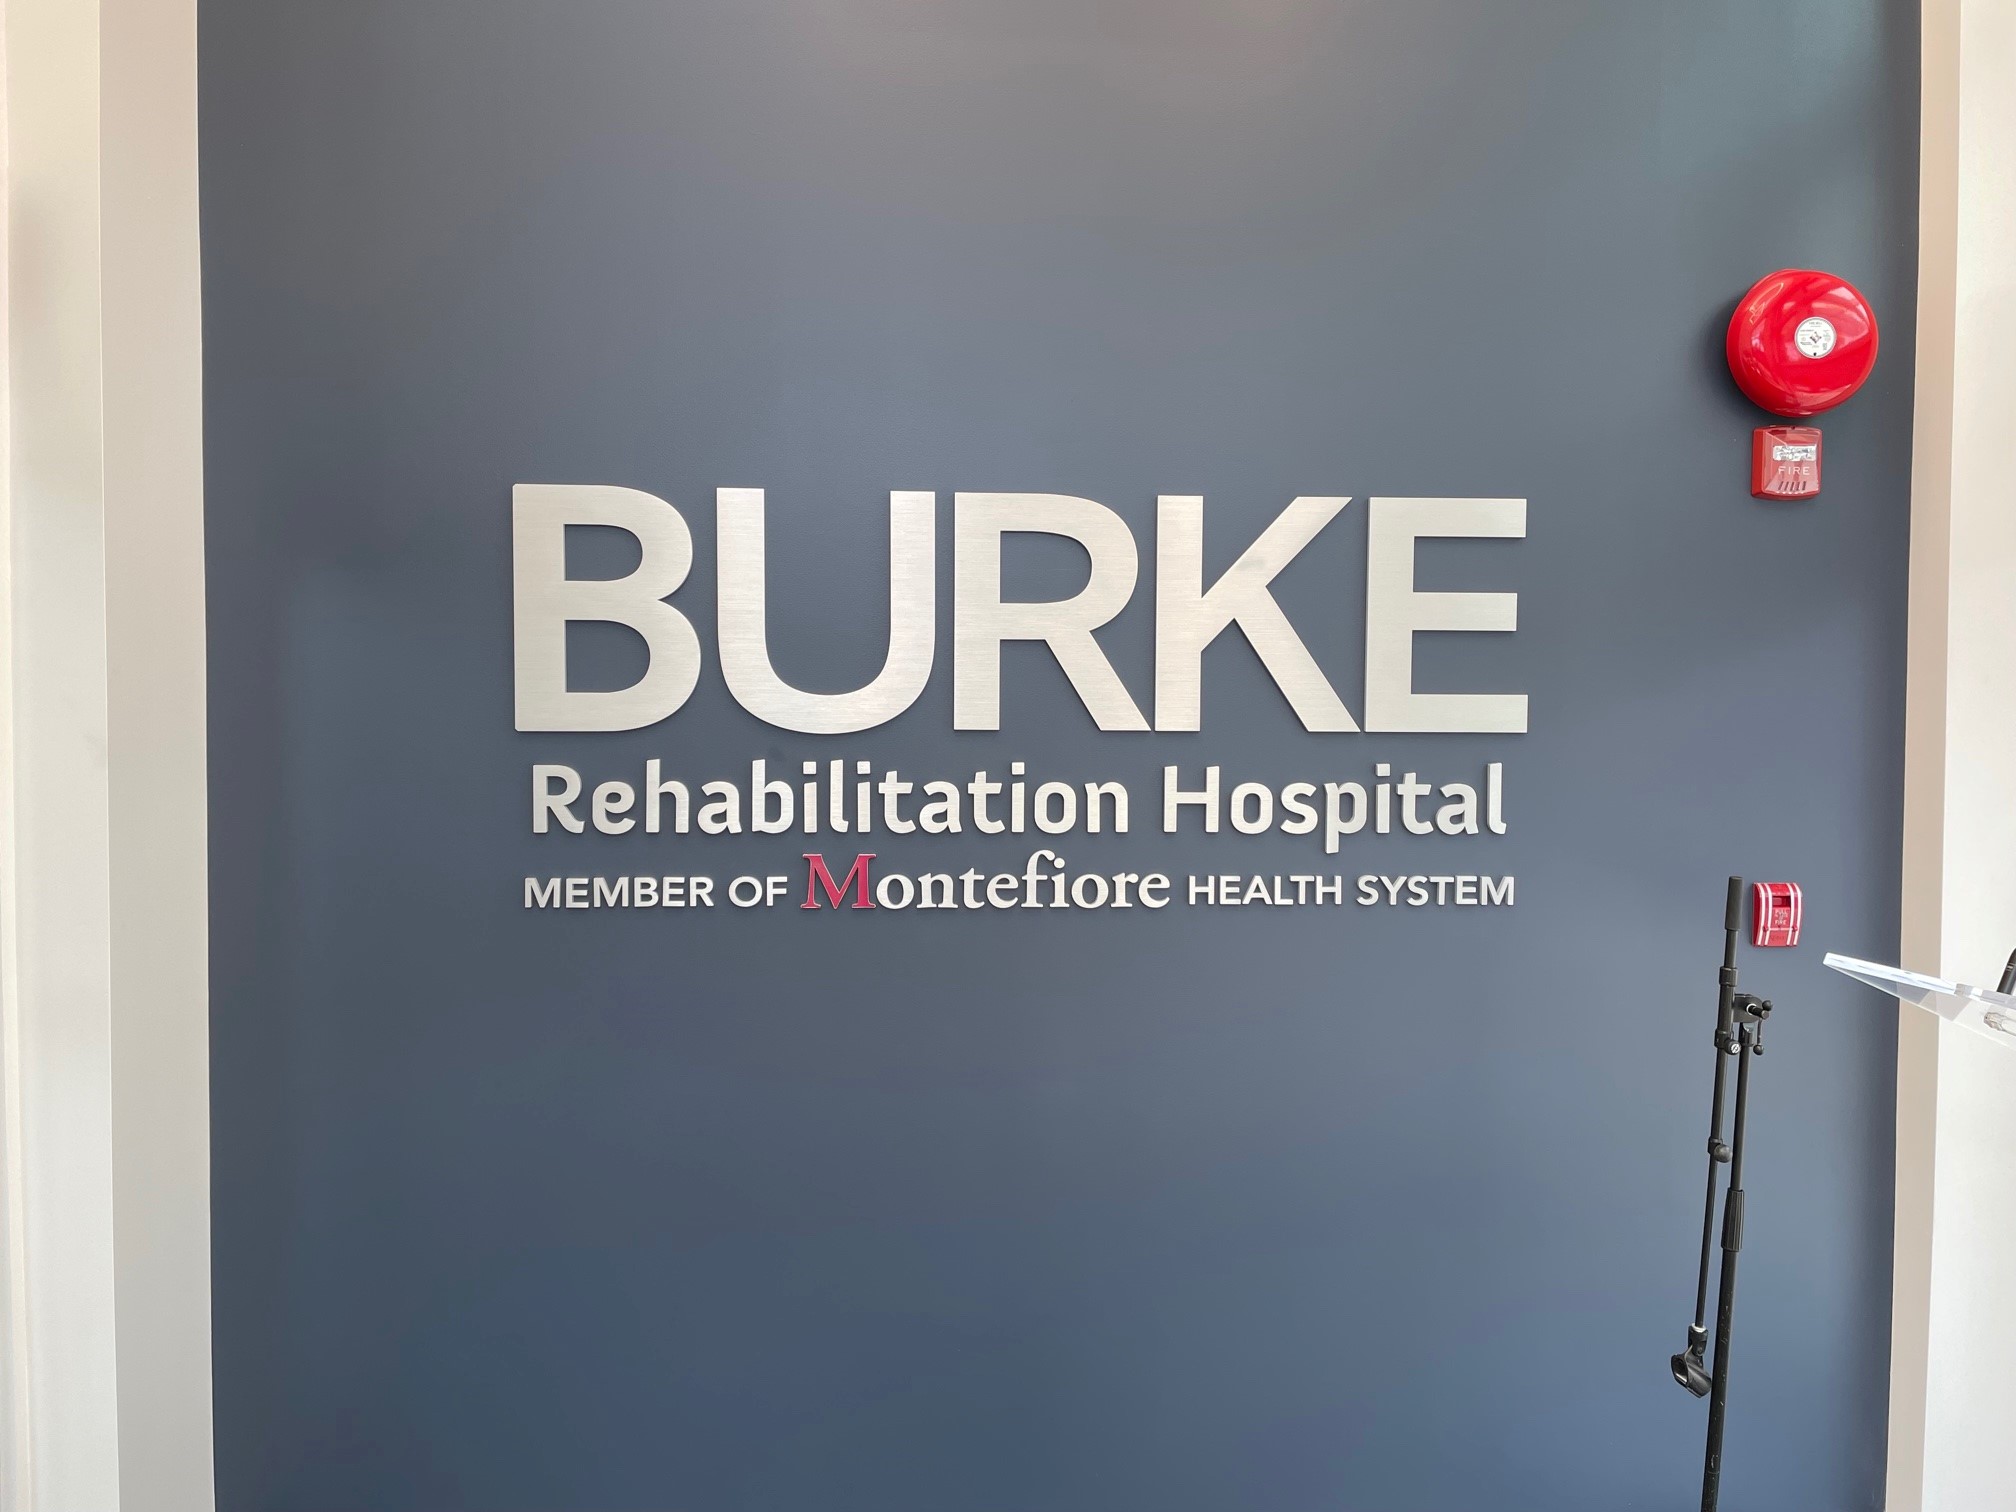 Burke Rehabilitation Hospital’s identity in dimensional letters at the building’s entrance